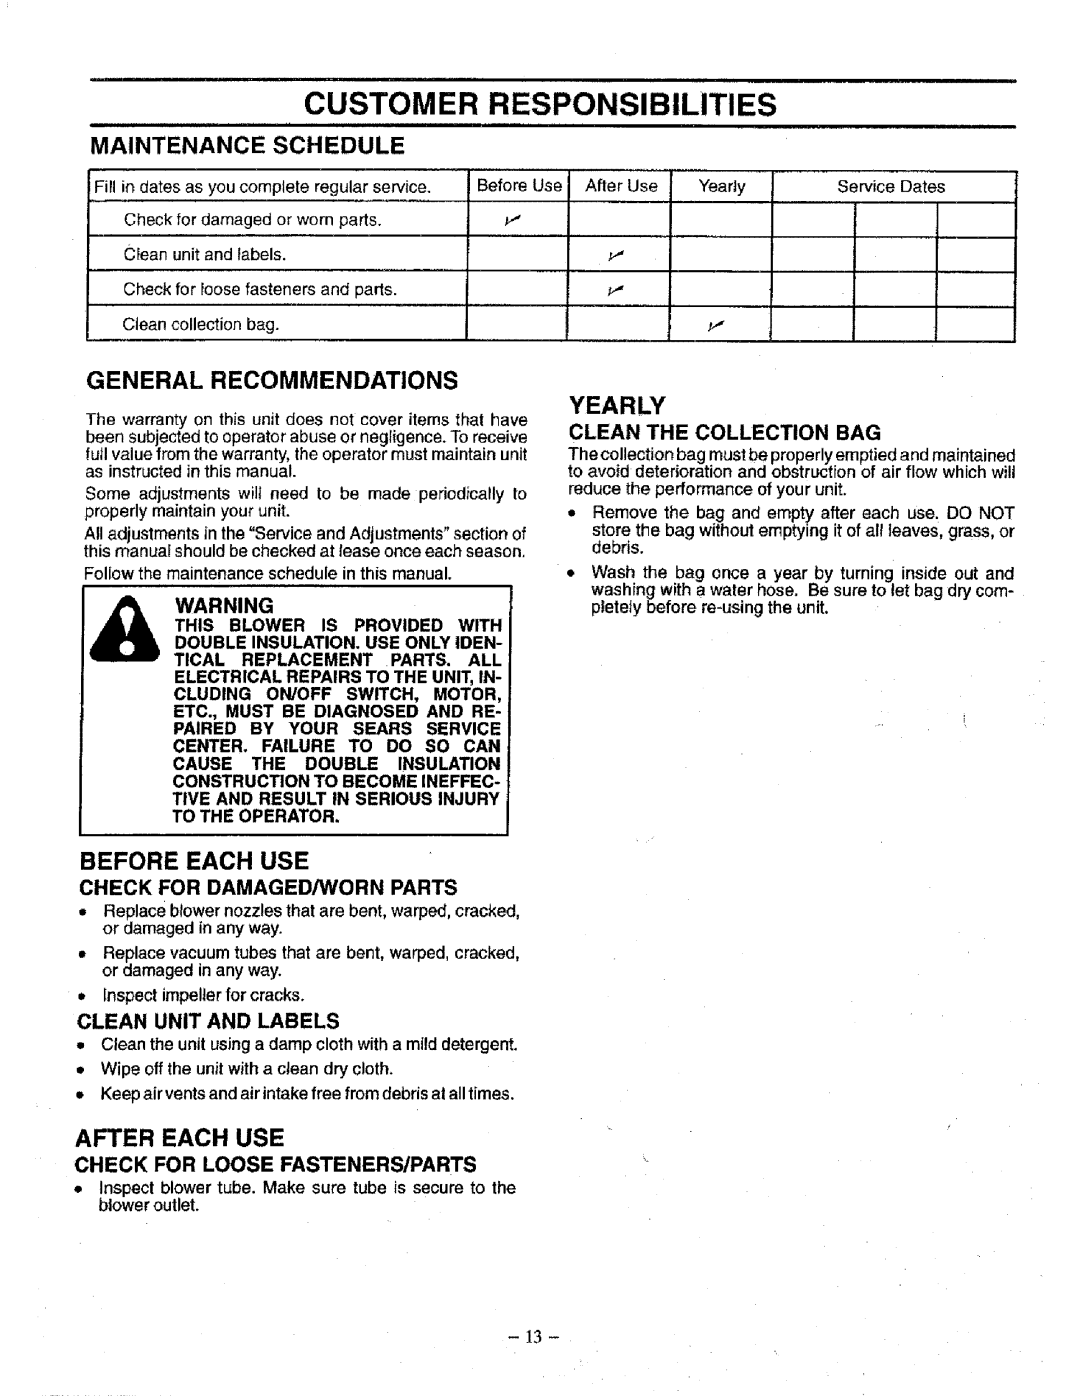 Craftsman 358.798340 manual Customer Responsibilities, General Recommendations, Before Each Use, After Each Use, Yearly 